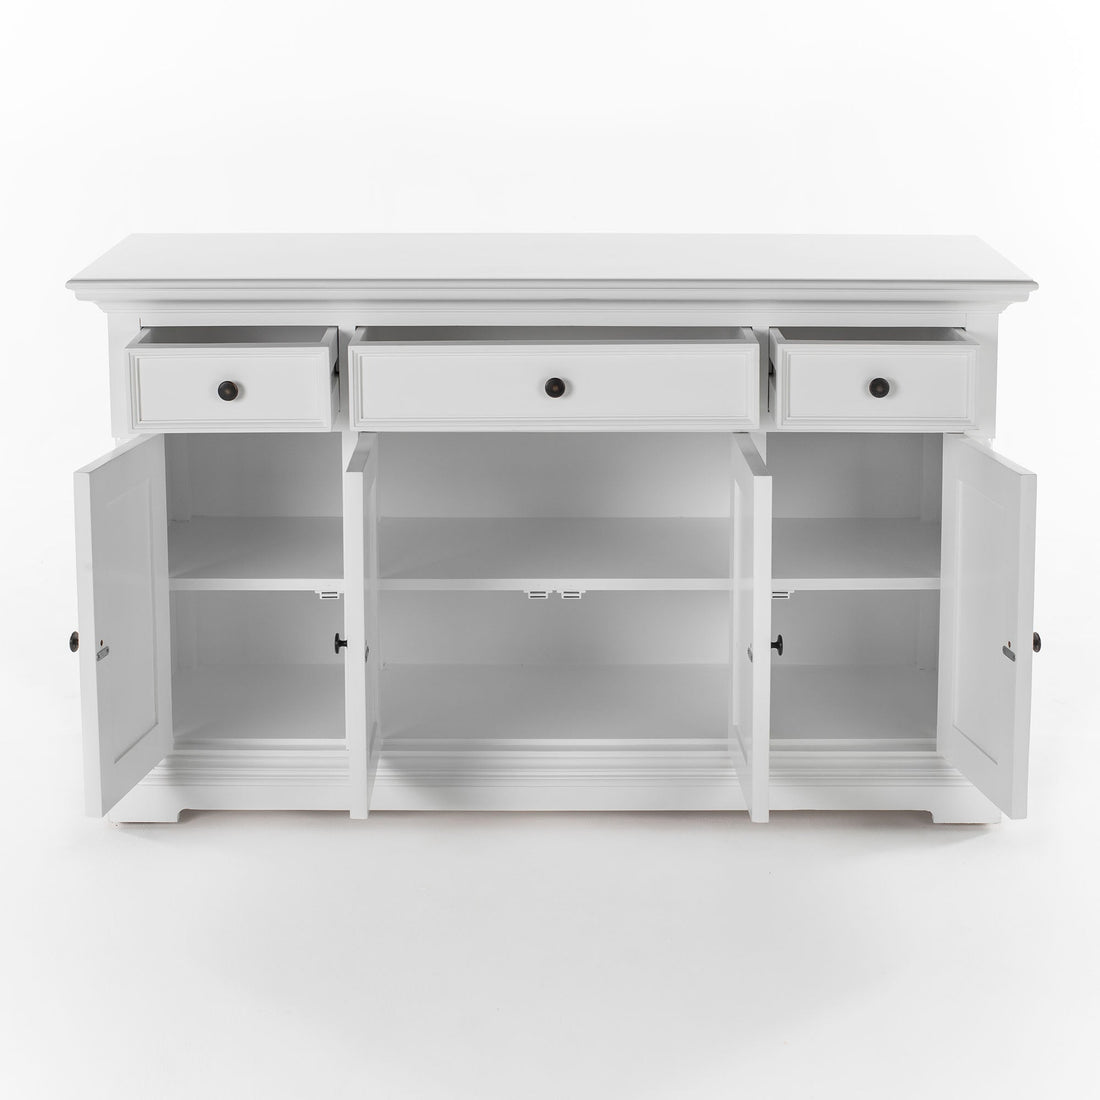 Provence sideboard with 4 doors and 3 drawers